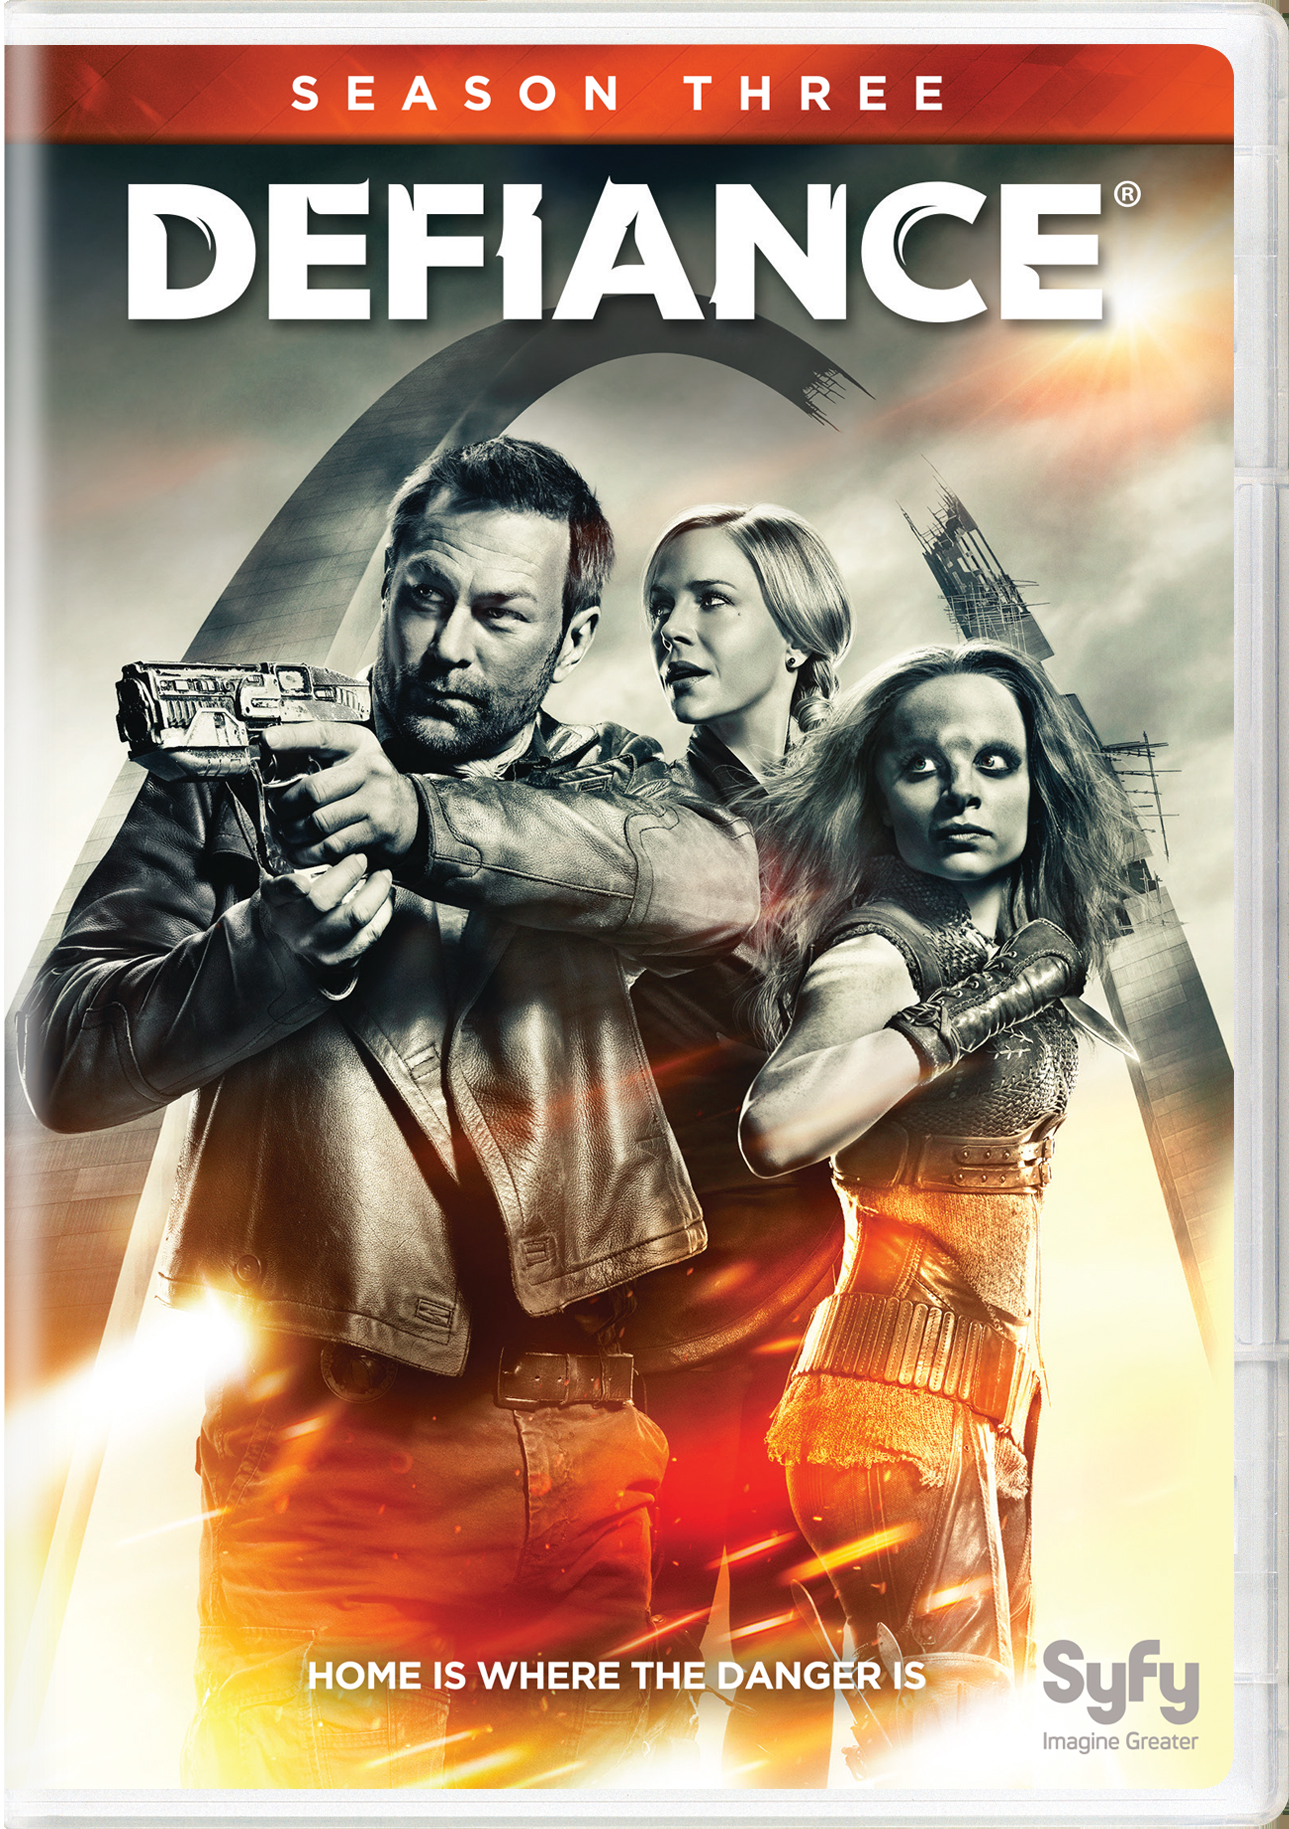 Defiance: Season 3 - DVD   - Sci Fi Television On DVD - TV Shows On GRUV